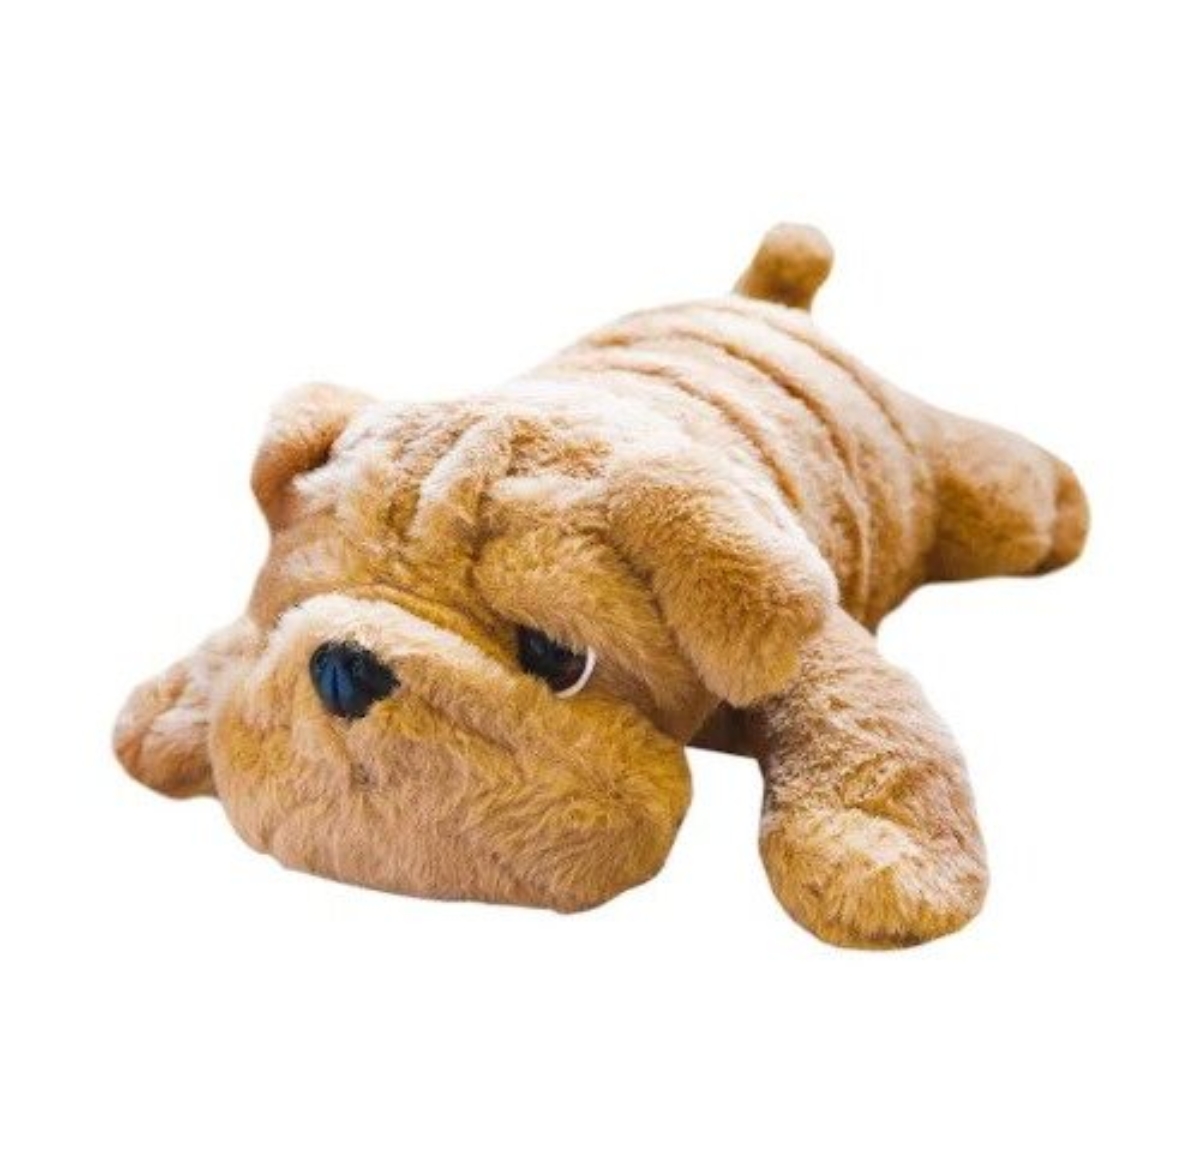 https://www.autism-products.com/wp-content/uploads/Weighted-Plush-Bulldog-1200x1159.jpg